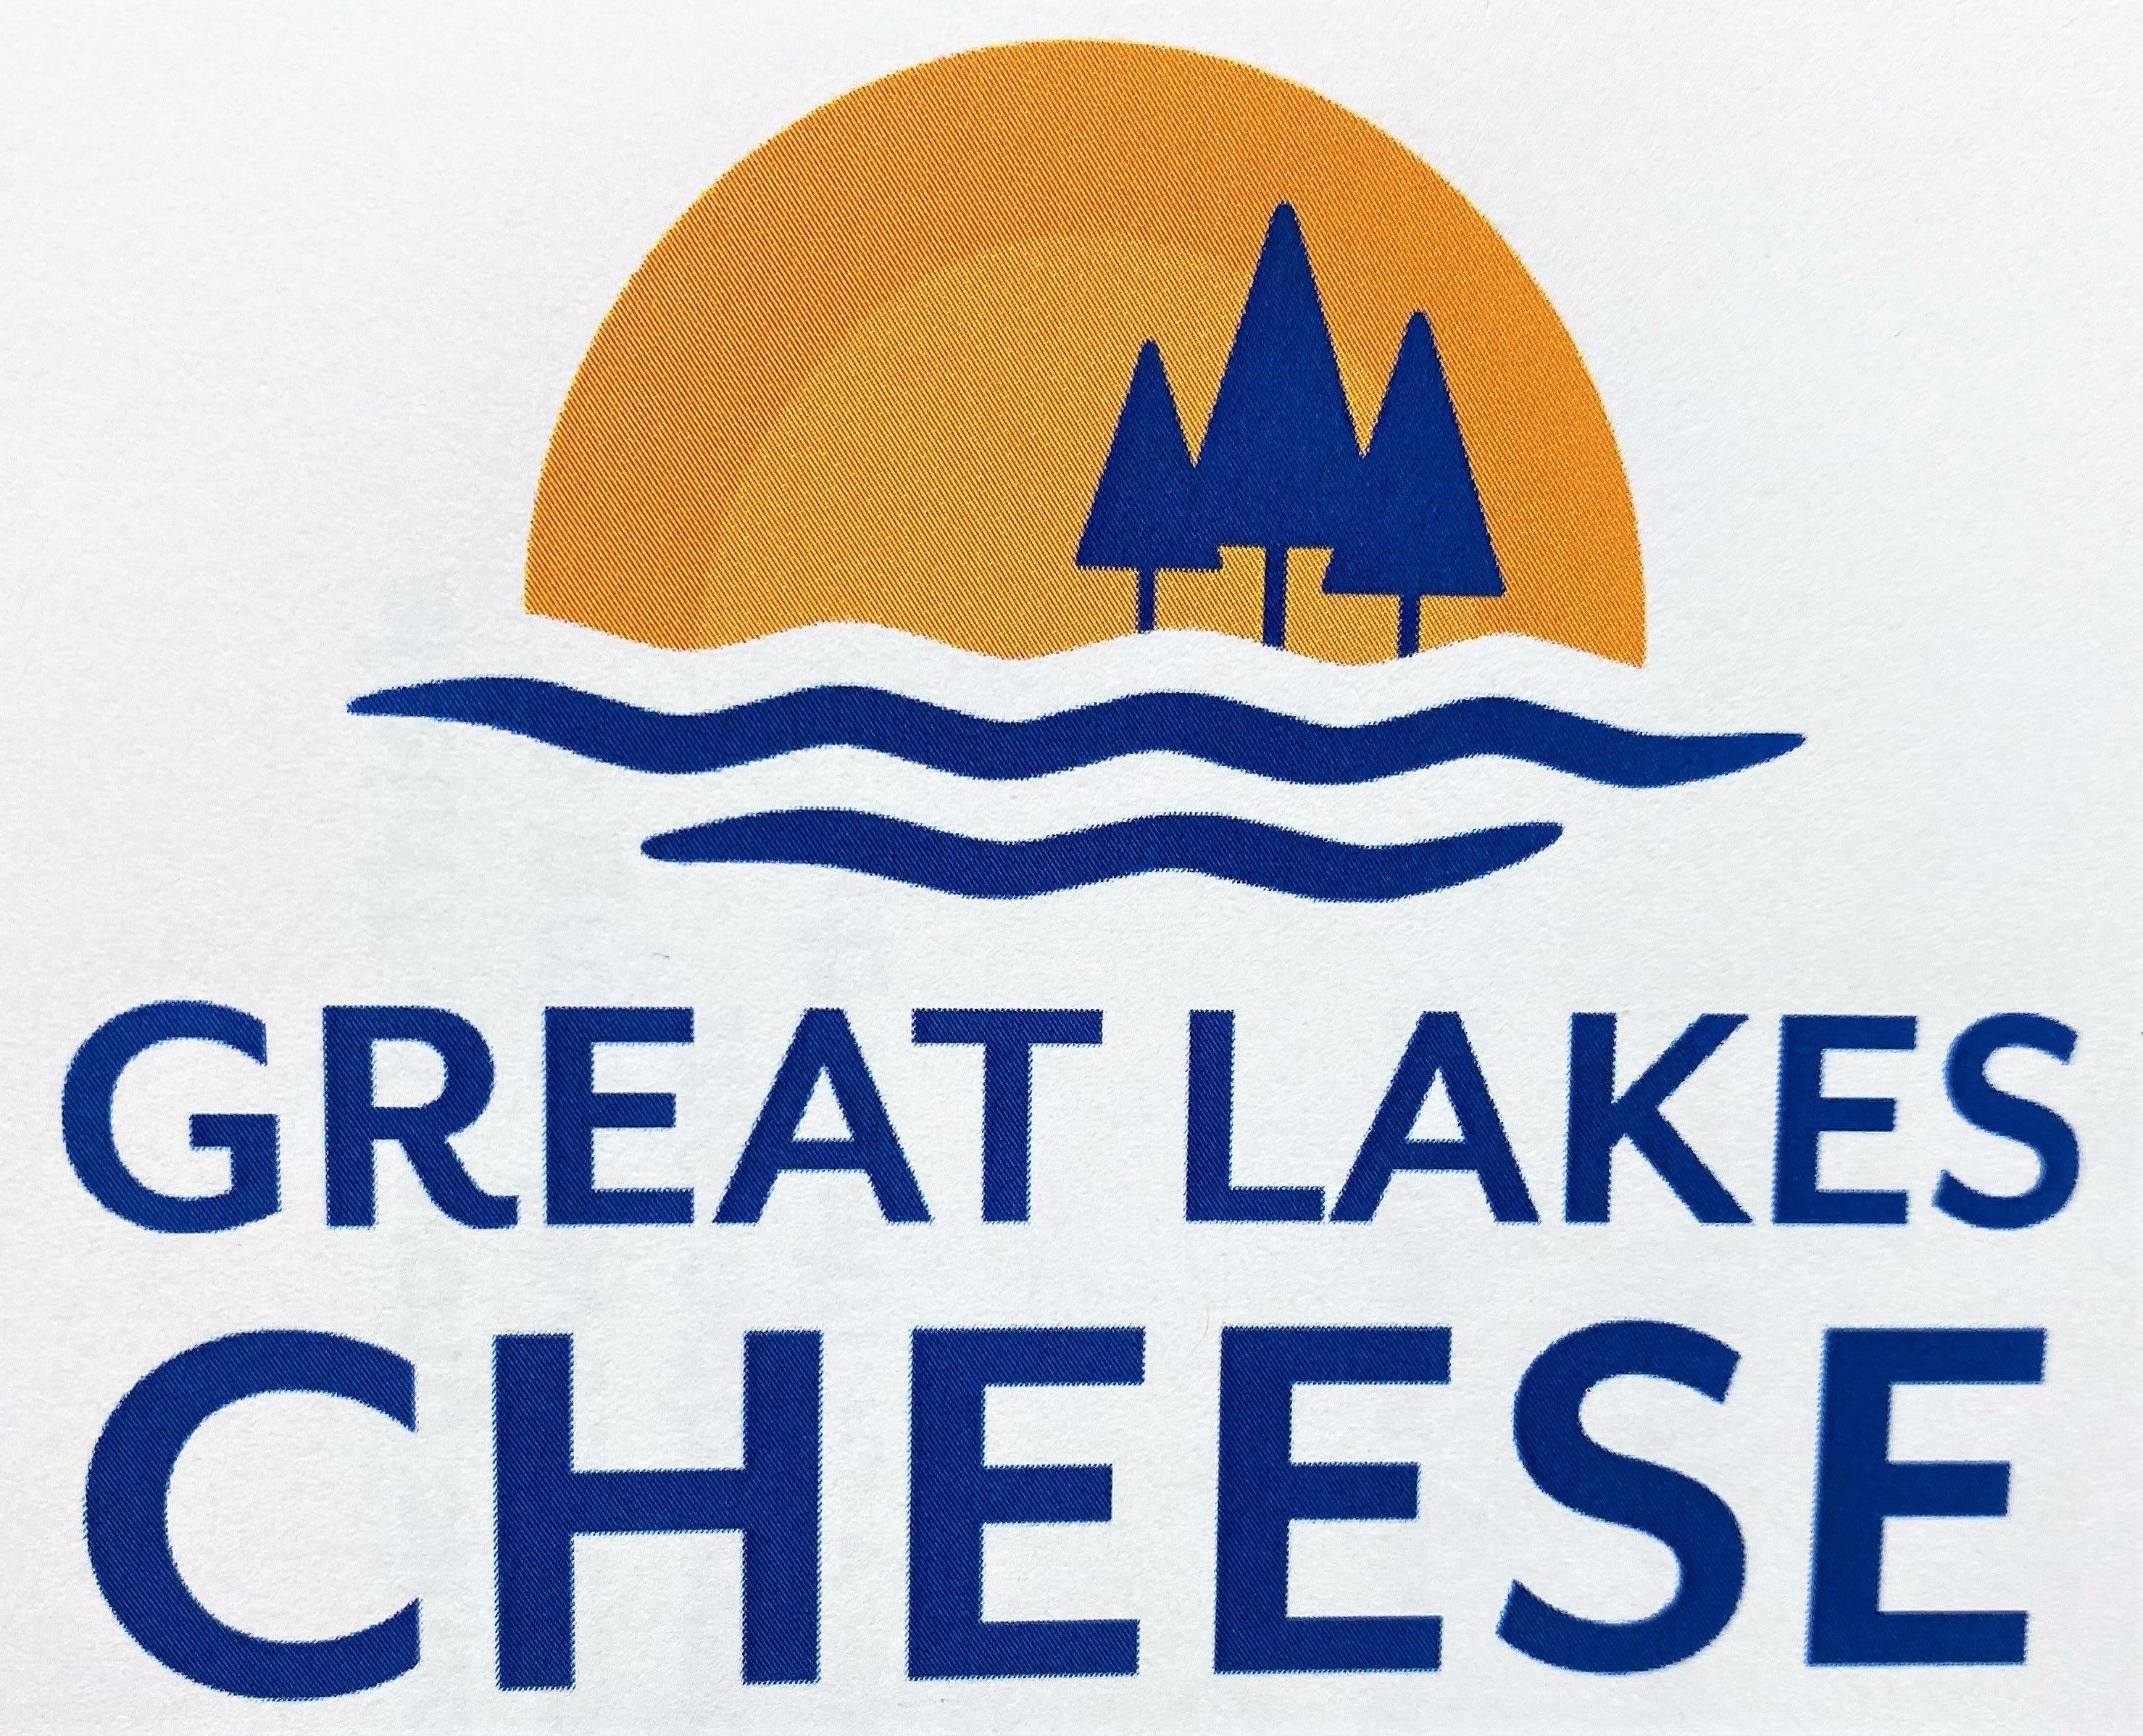 Great Lakes Cheese has started work on its $185M facility in Abilene.